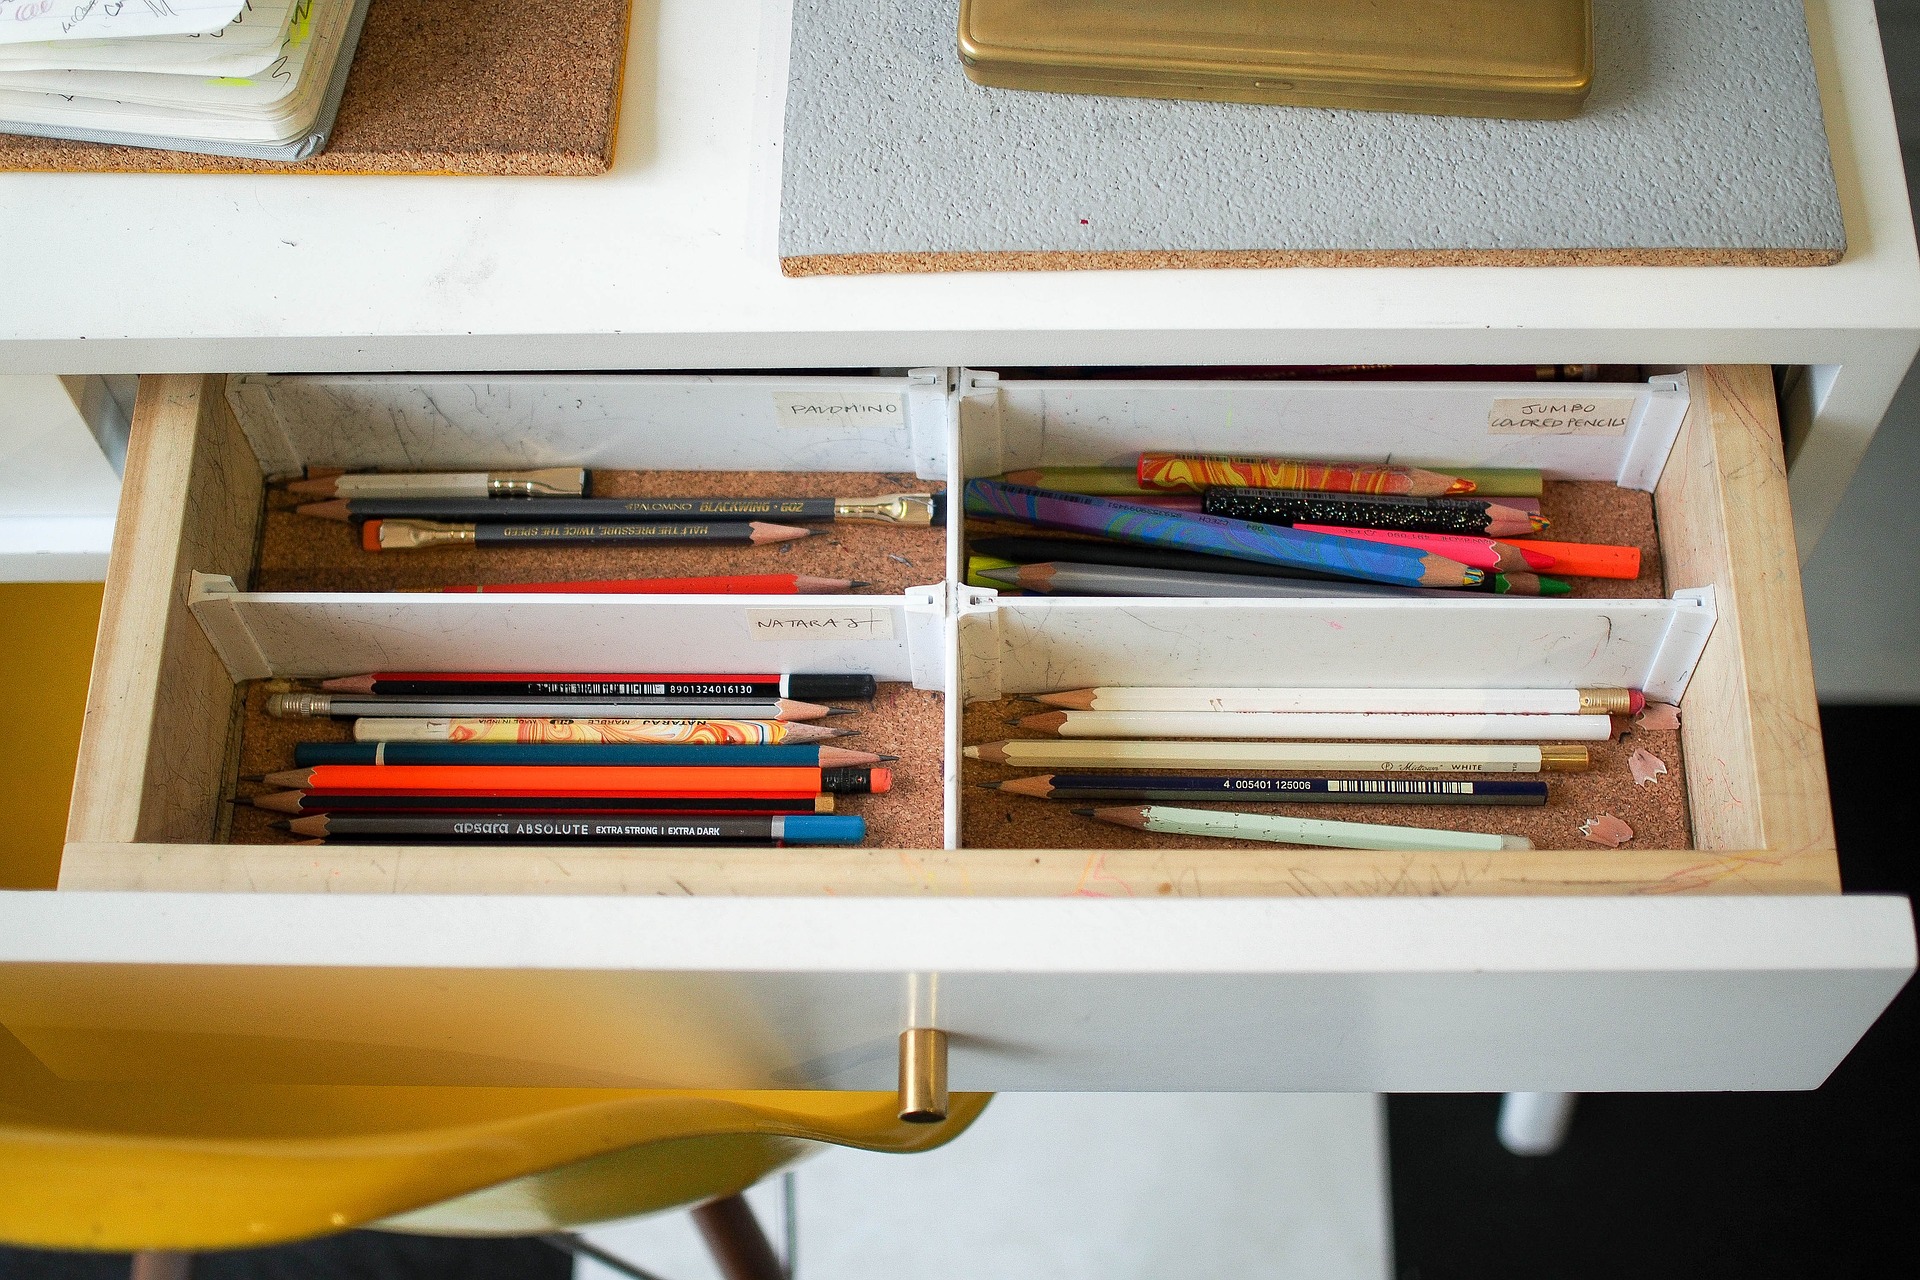 How to Organize Drawers